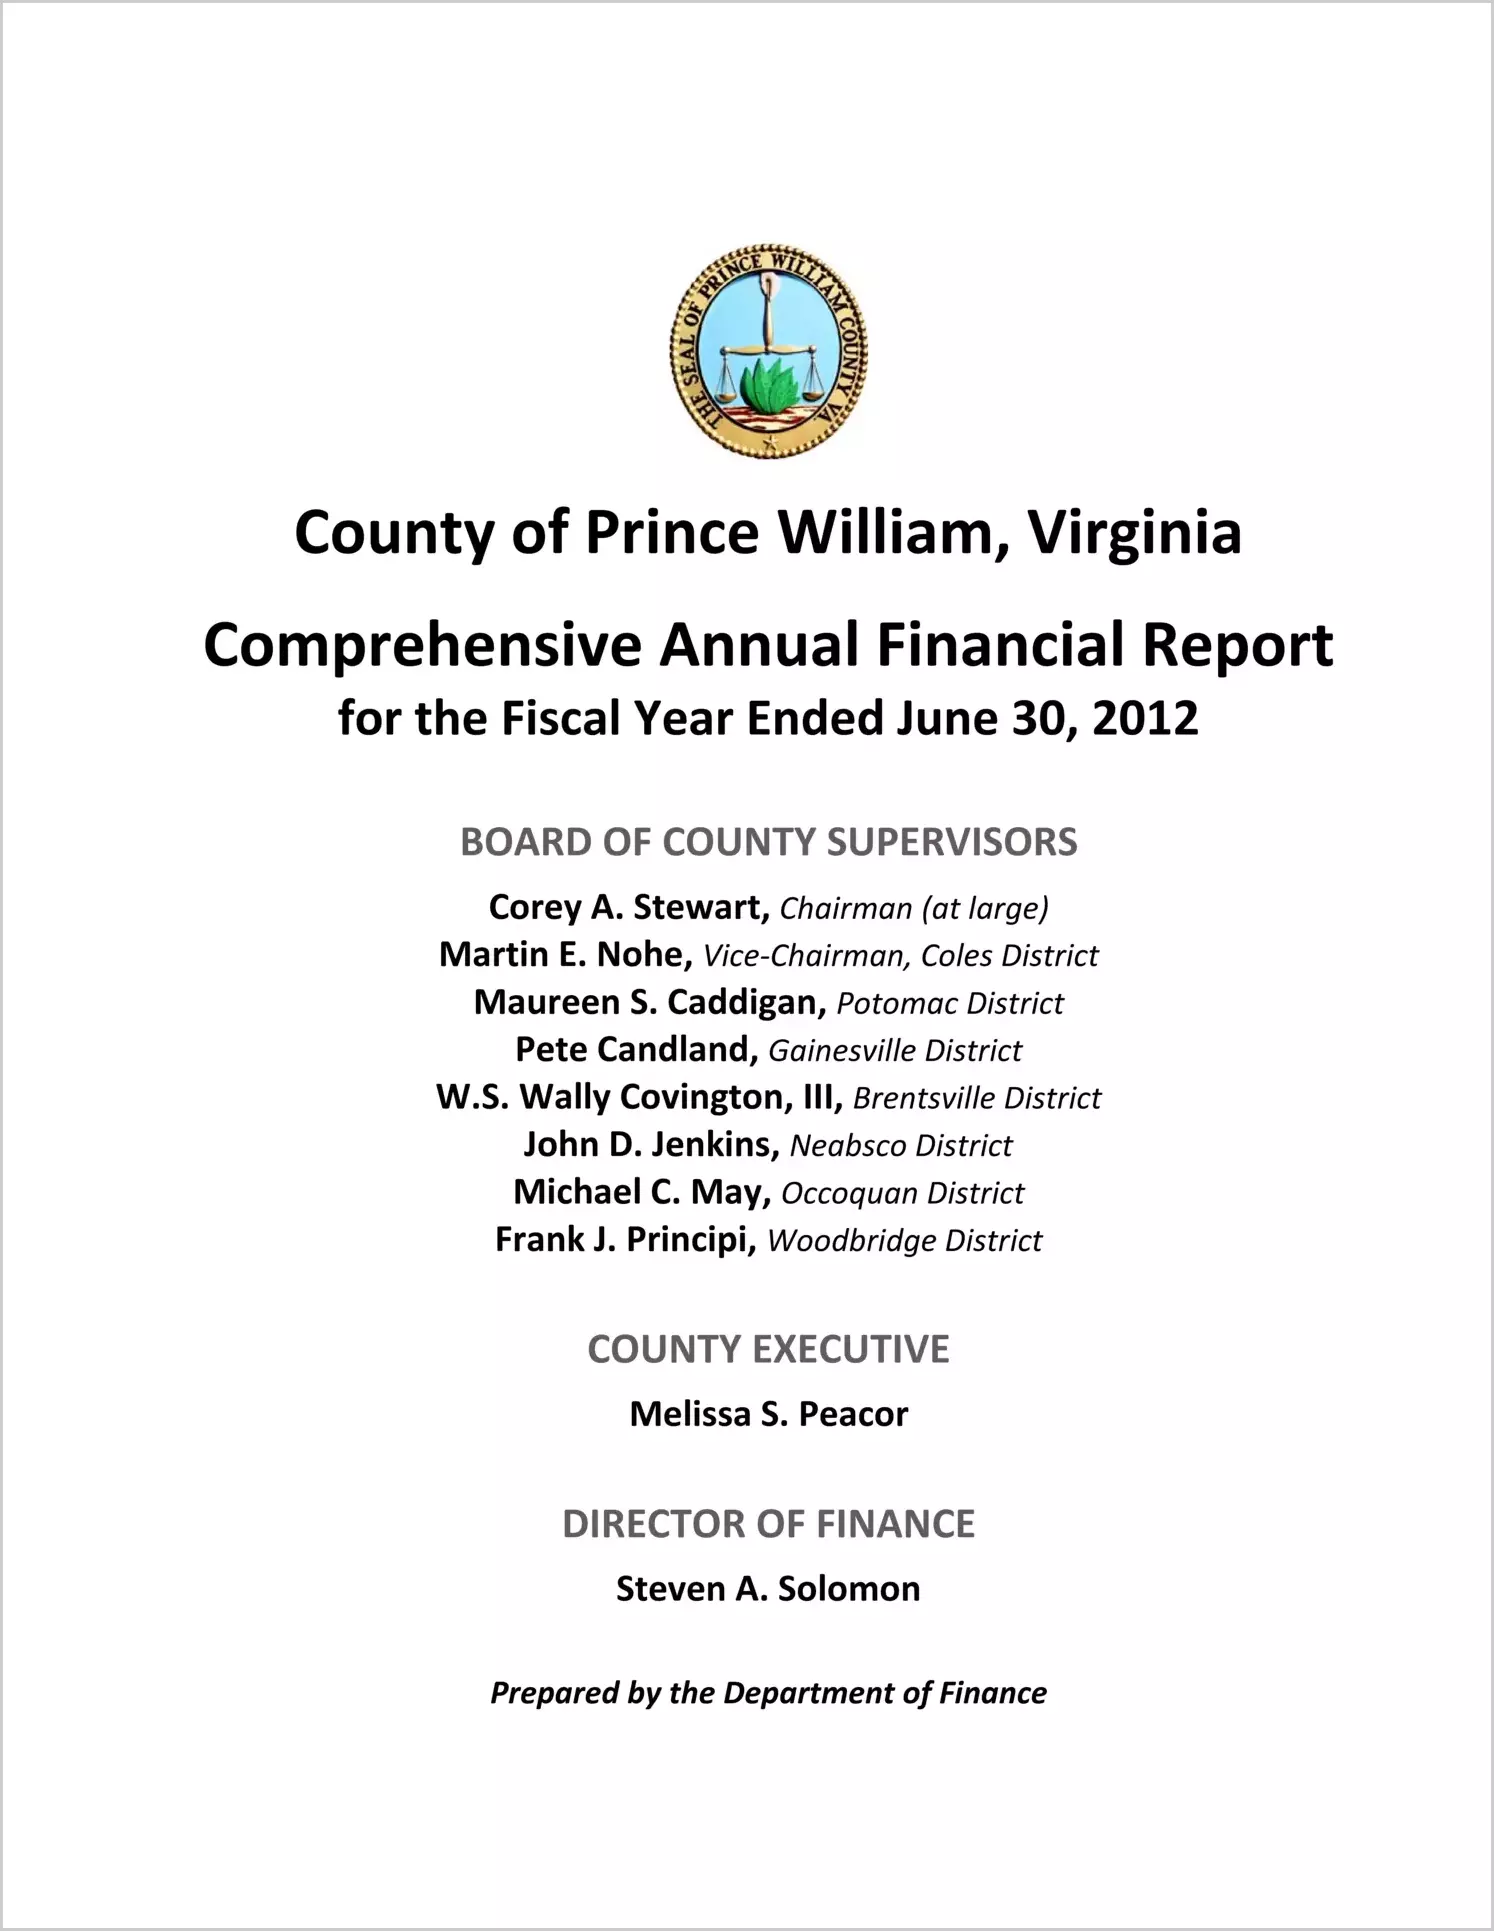 2012 Annual Financial Report for County of Prince William